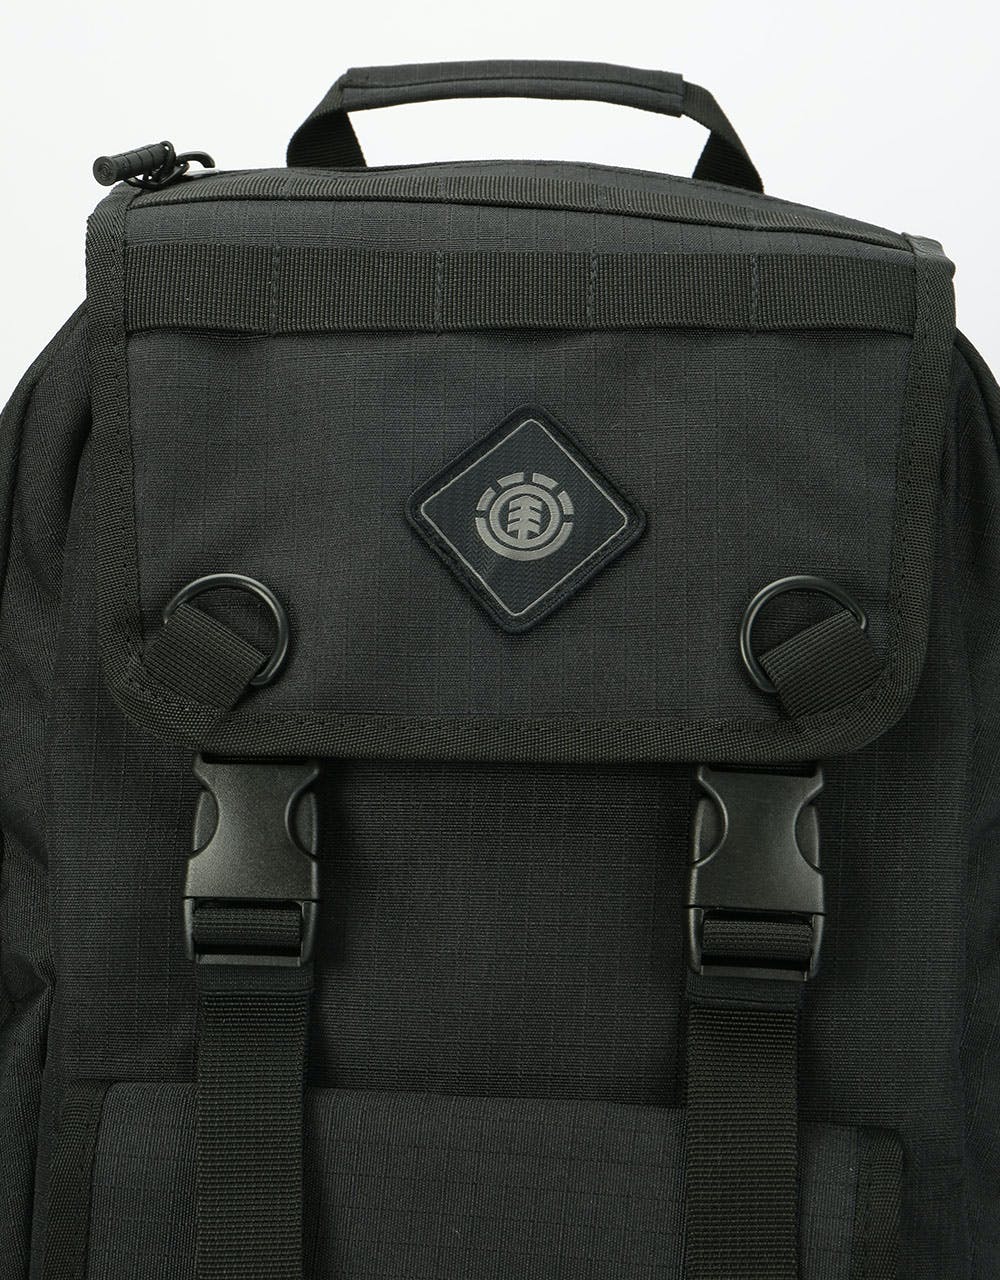 Element Cypress Recruit Backpack - All Black